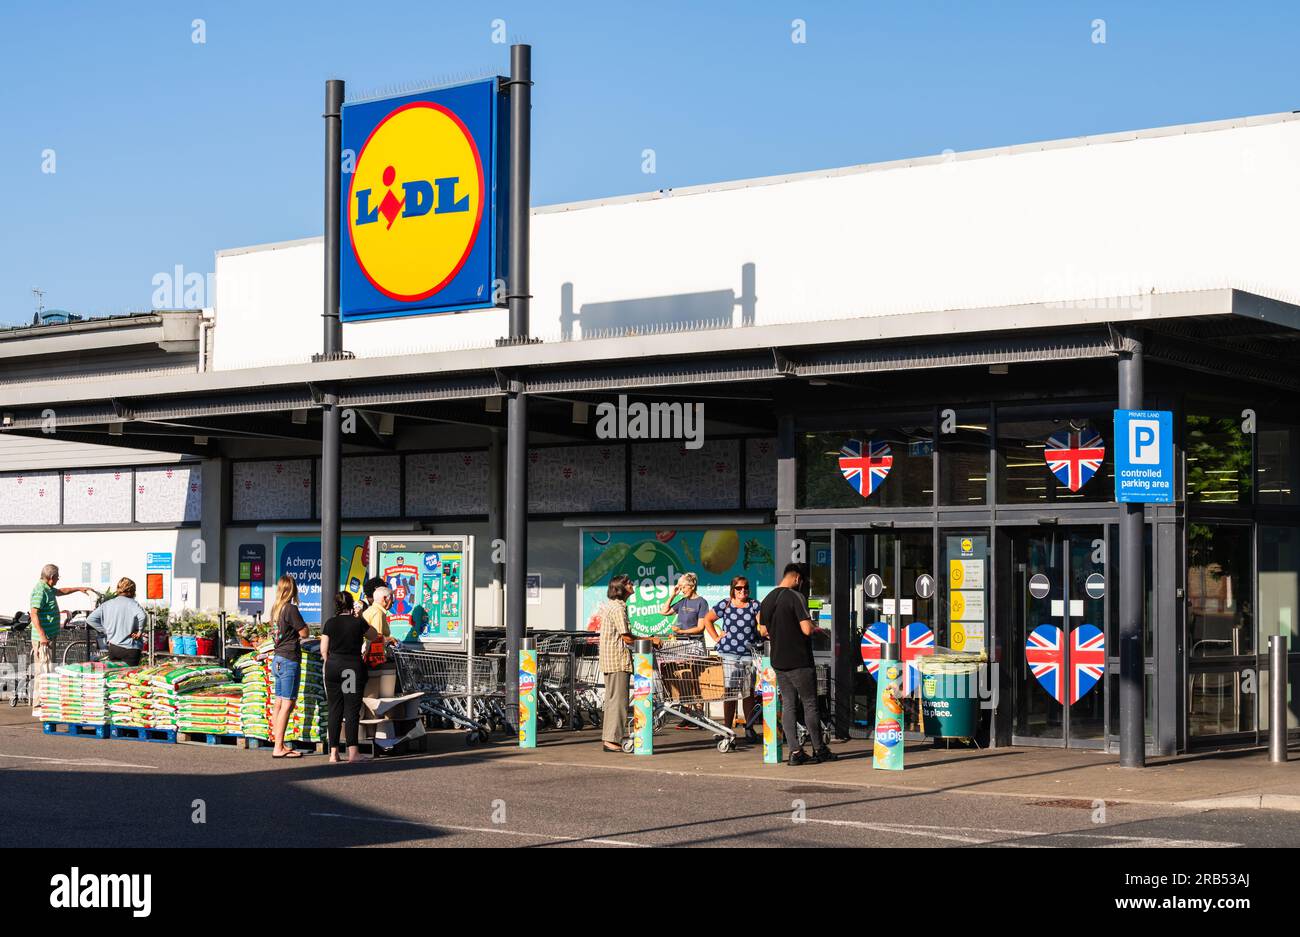 Line of people queueing outside a large Lidl food & grocery store or food retailer, waiting for it to open in Littlehampton, West Sussex, UK. Stock Photo